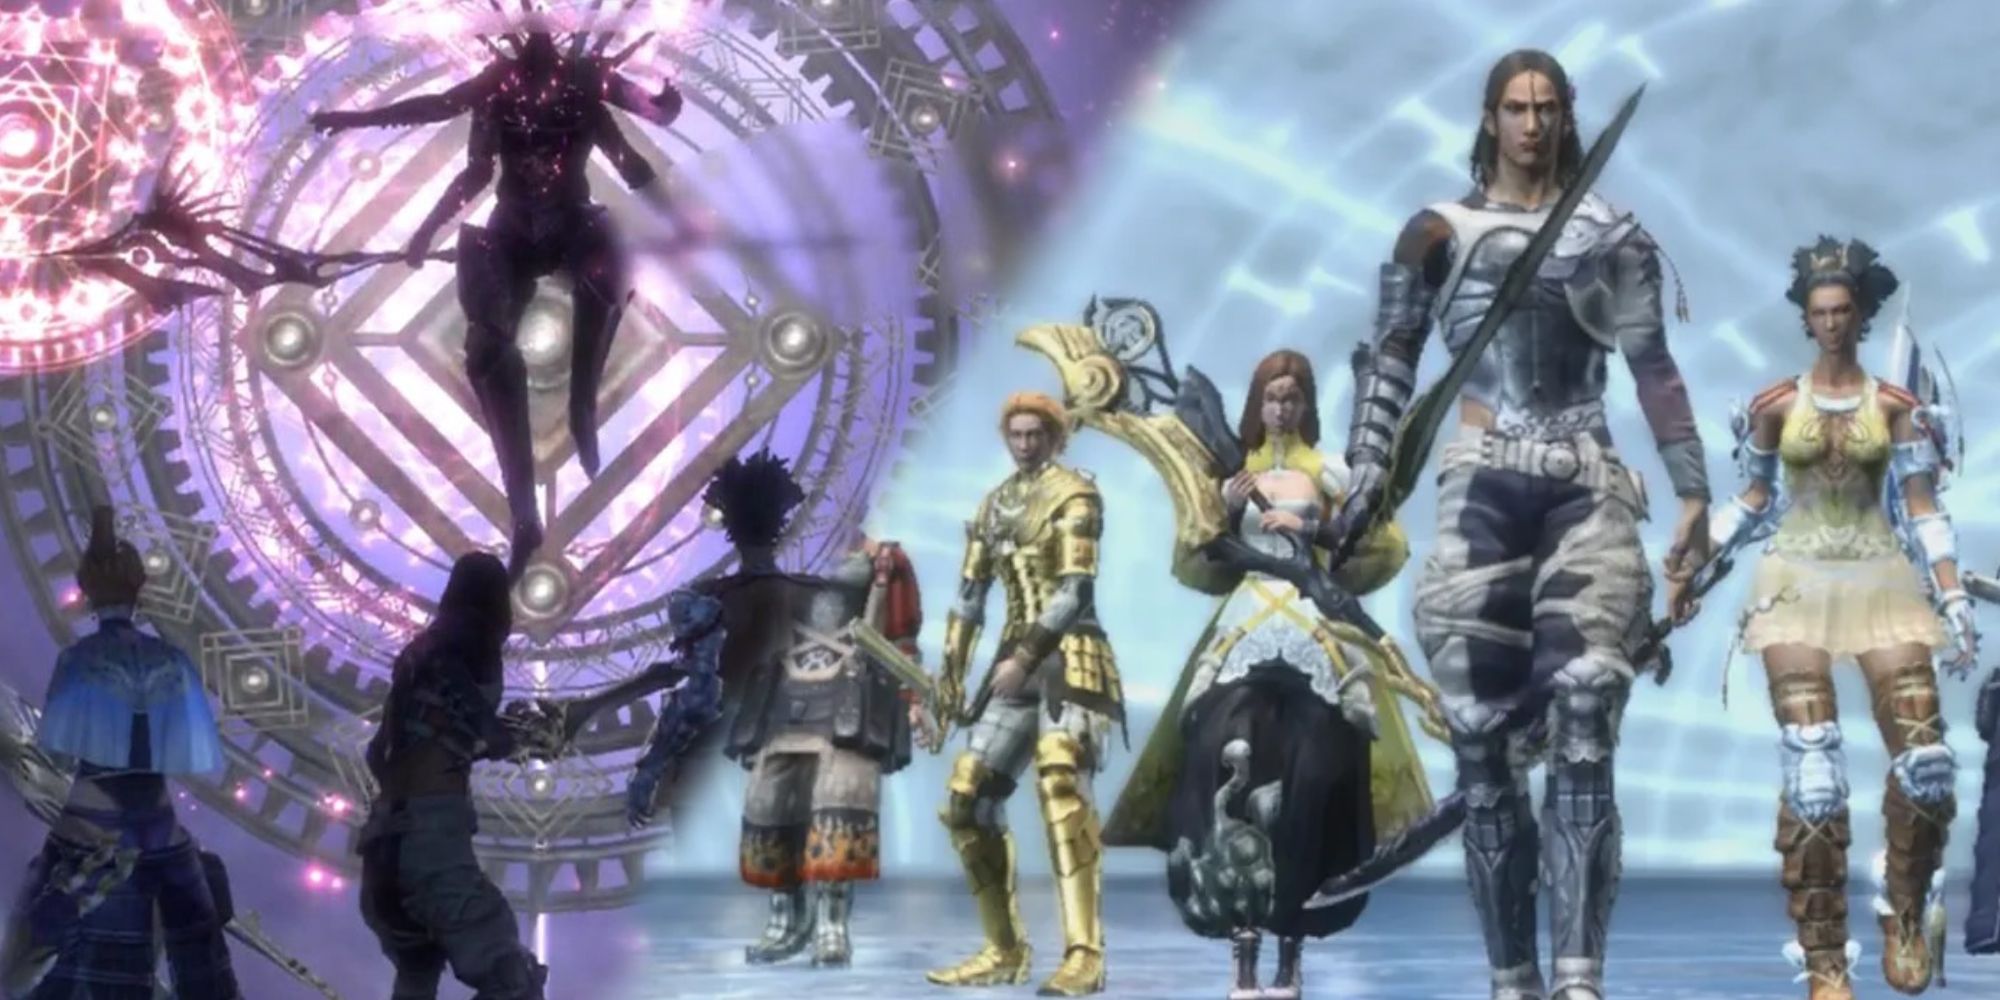 Lost Odyssey final battle and all the characters